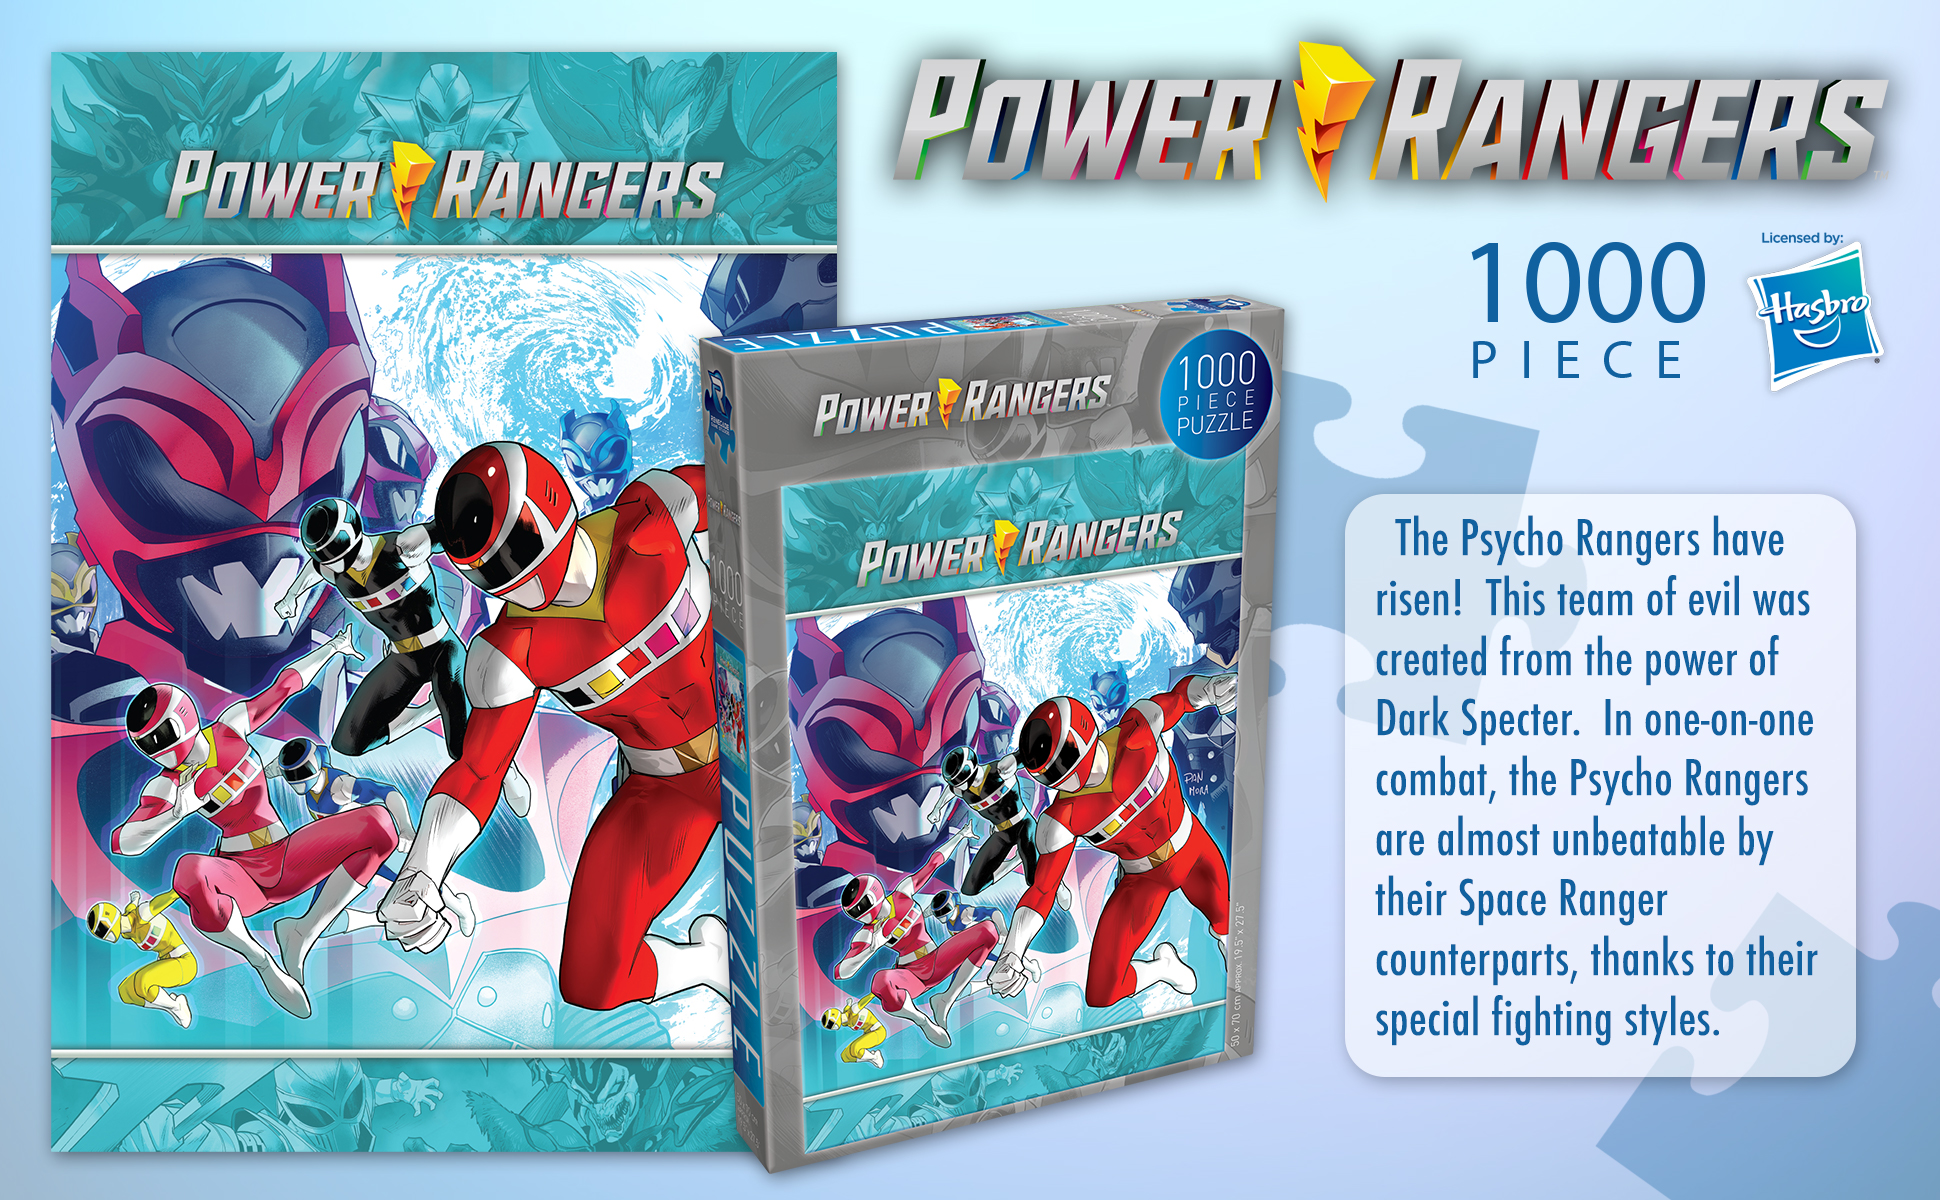 Power Rangers Rise of the Psycho Rangers Jigsaw Puzzle